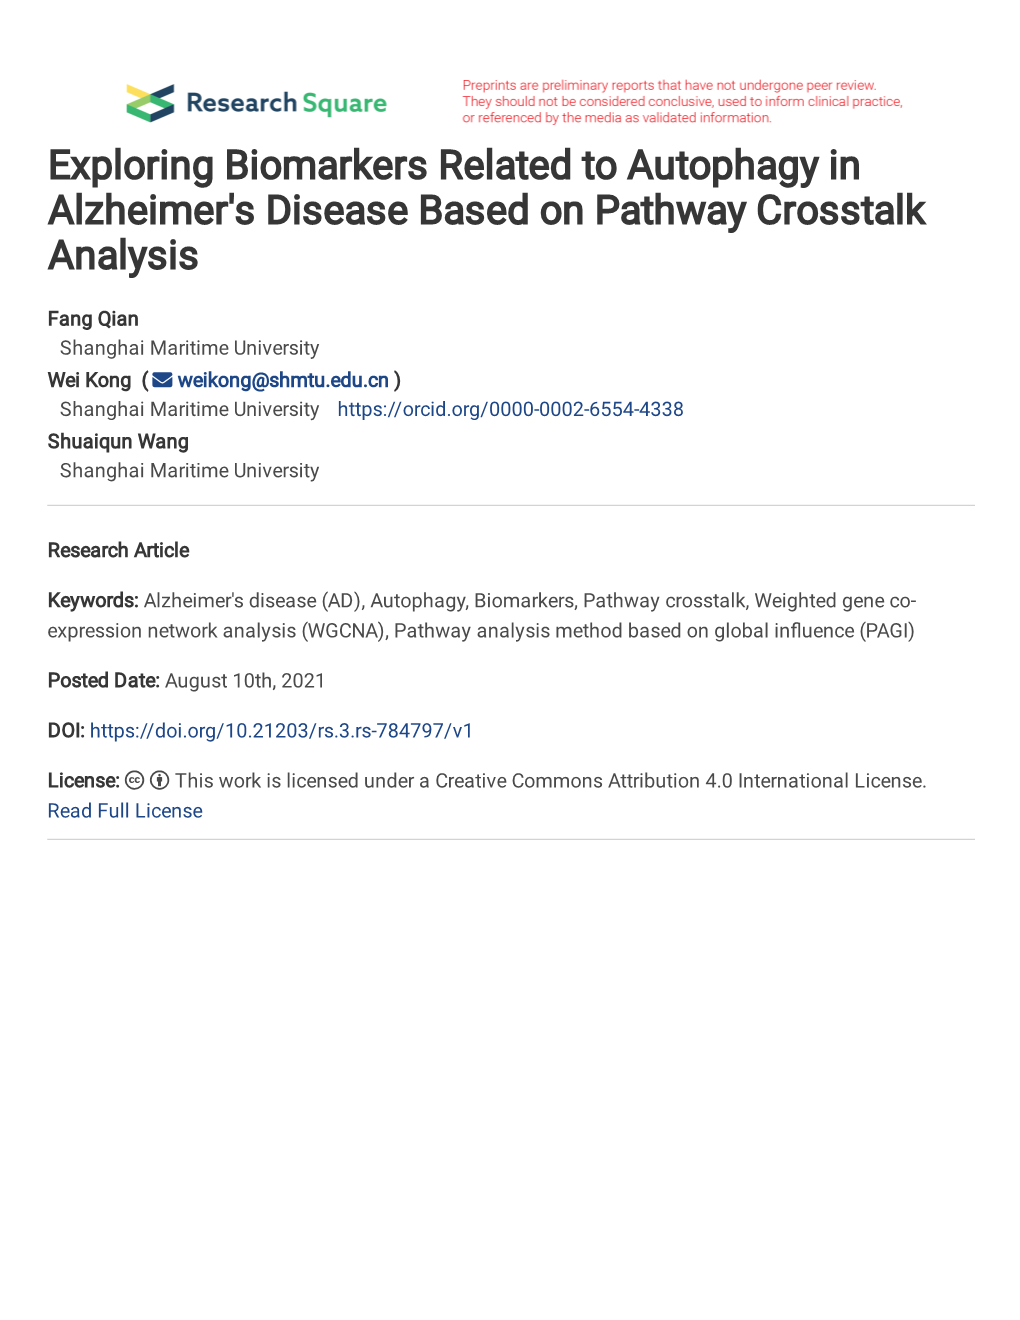 Exploring Biomarkers Related to Autophagy in Alzheimer's Disease Based on Pathway Crosstalk Analysis